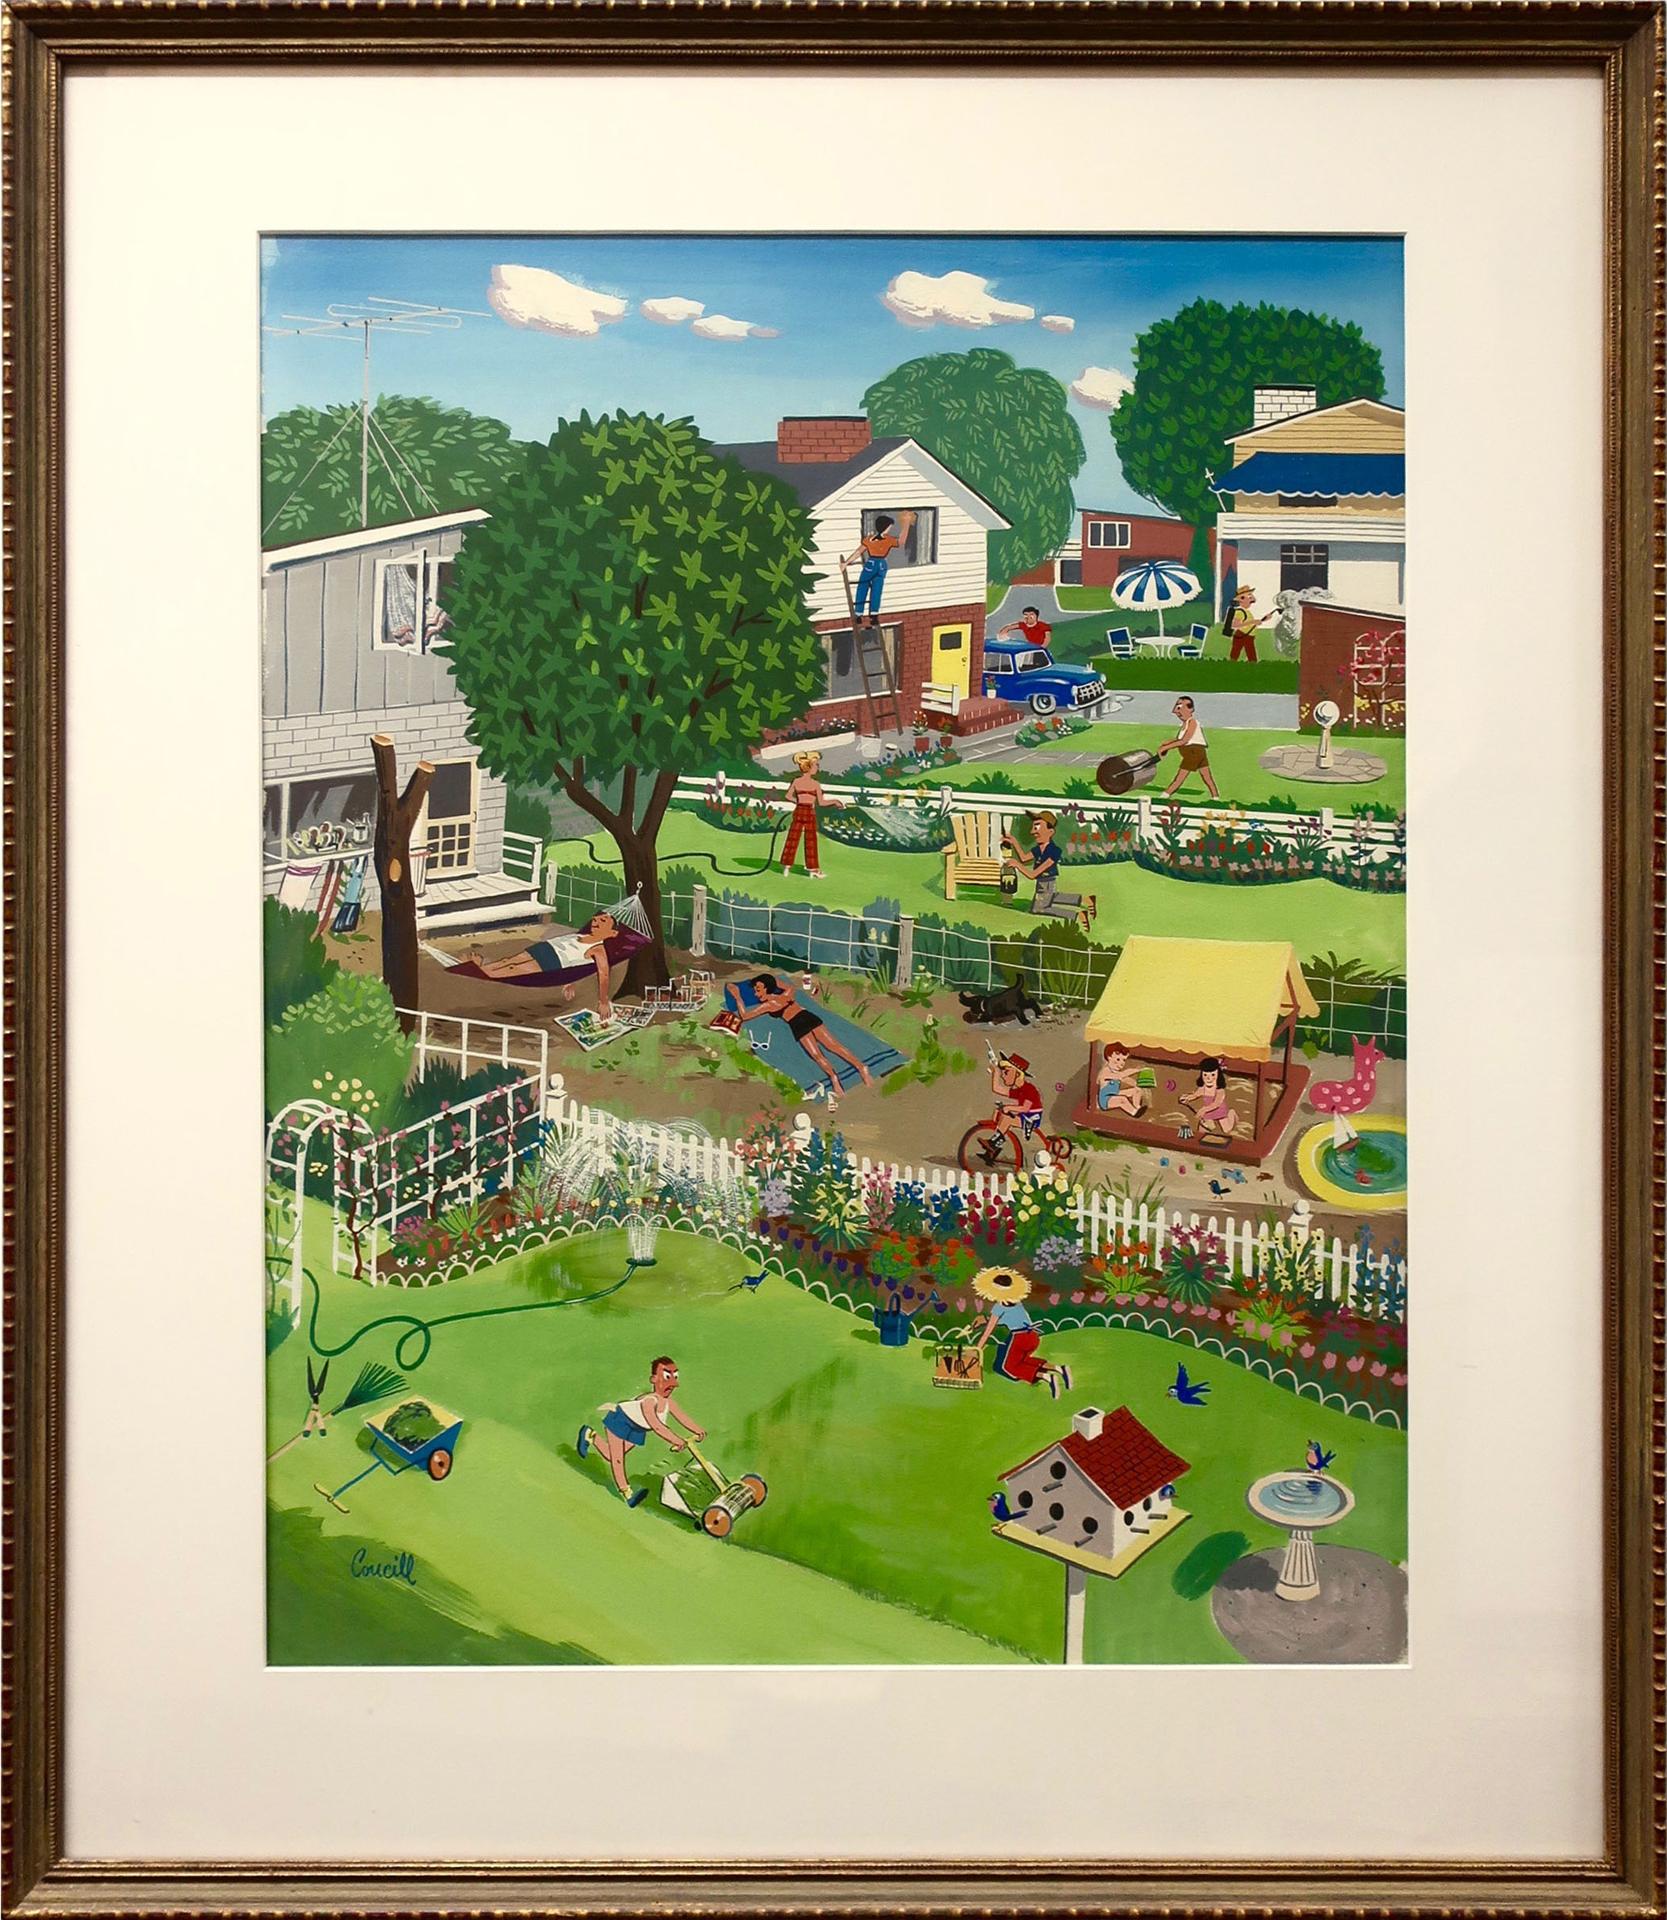 Irma Sophia Coucill - Untitled (Suburban Families On The Weekend)